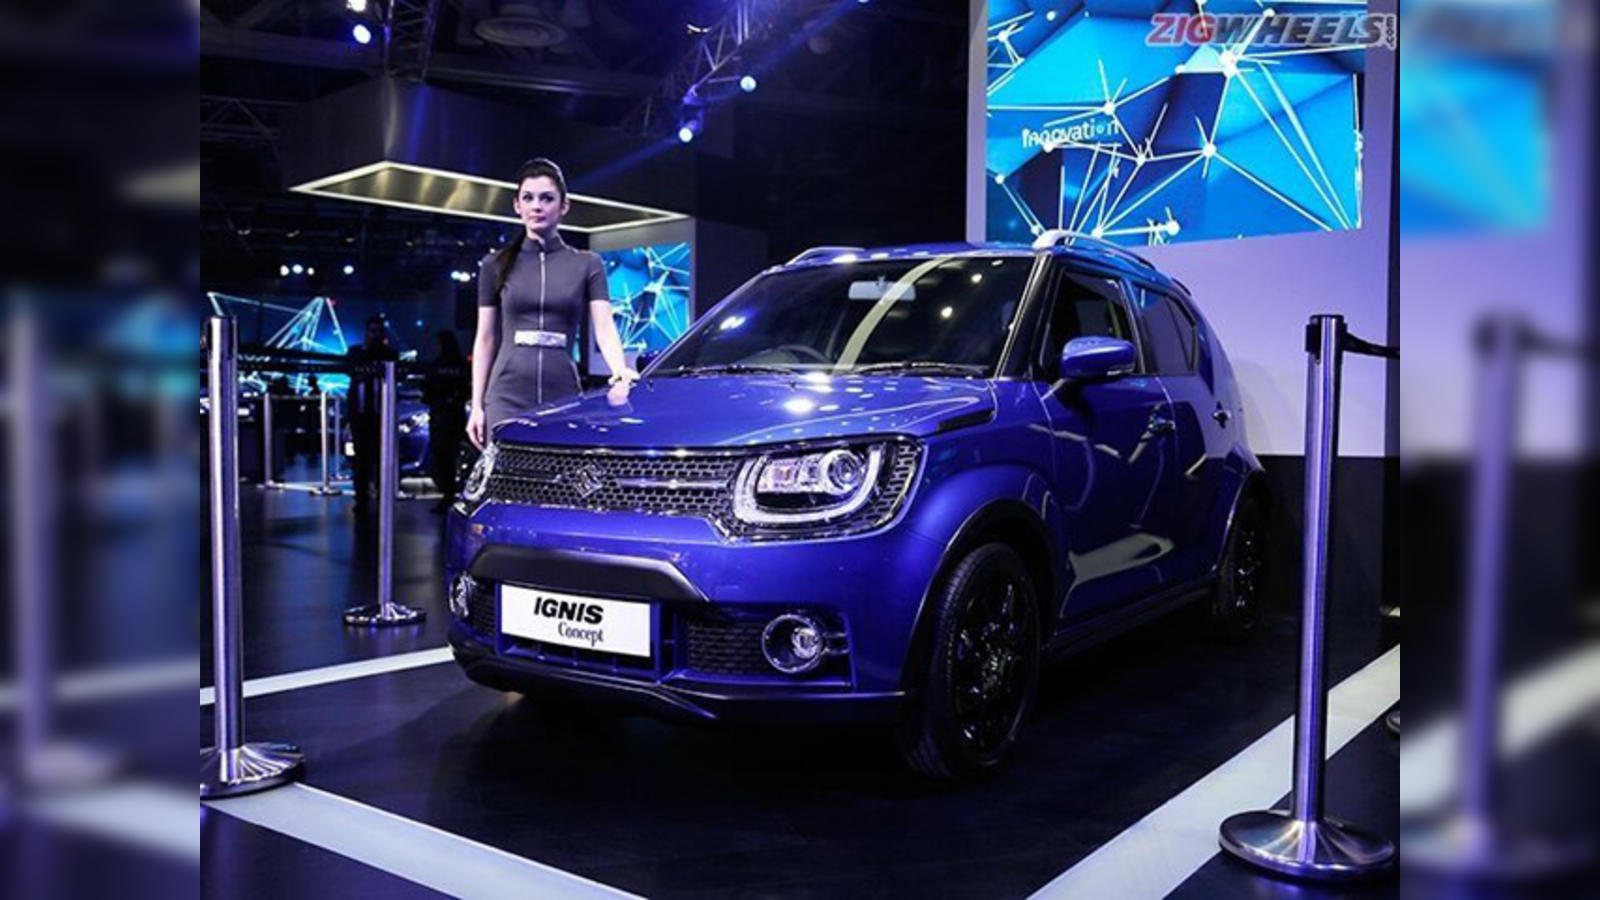 Maruti Suzuki Ignis: Top 5 facts you need to know - The Economic Times